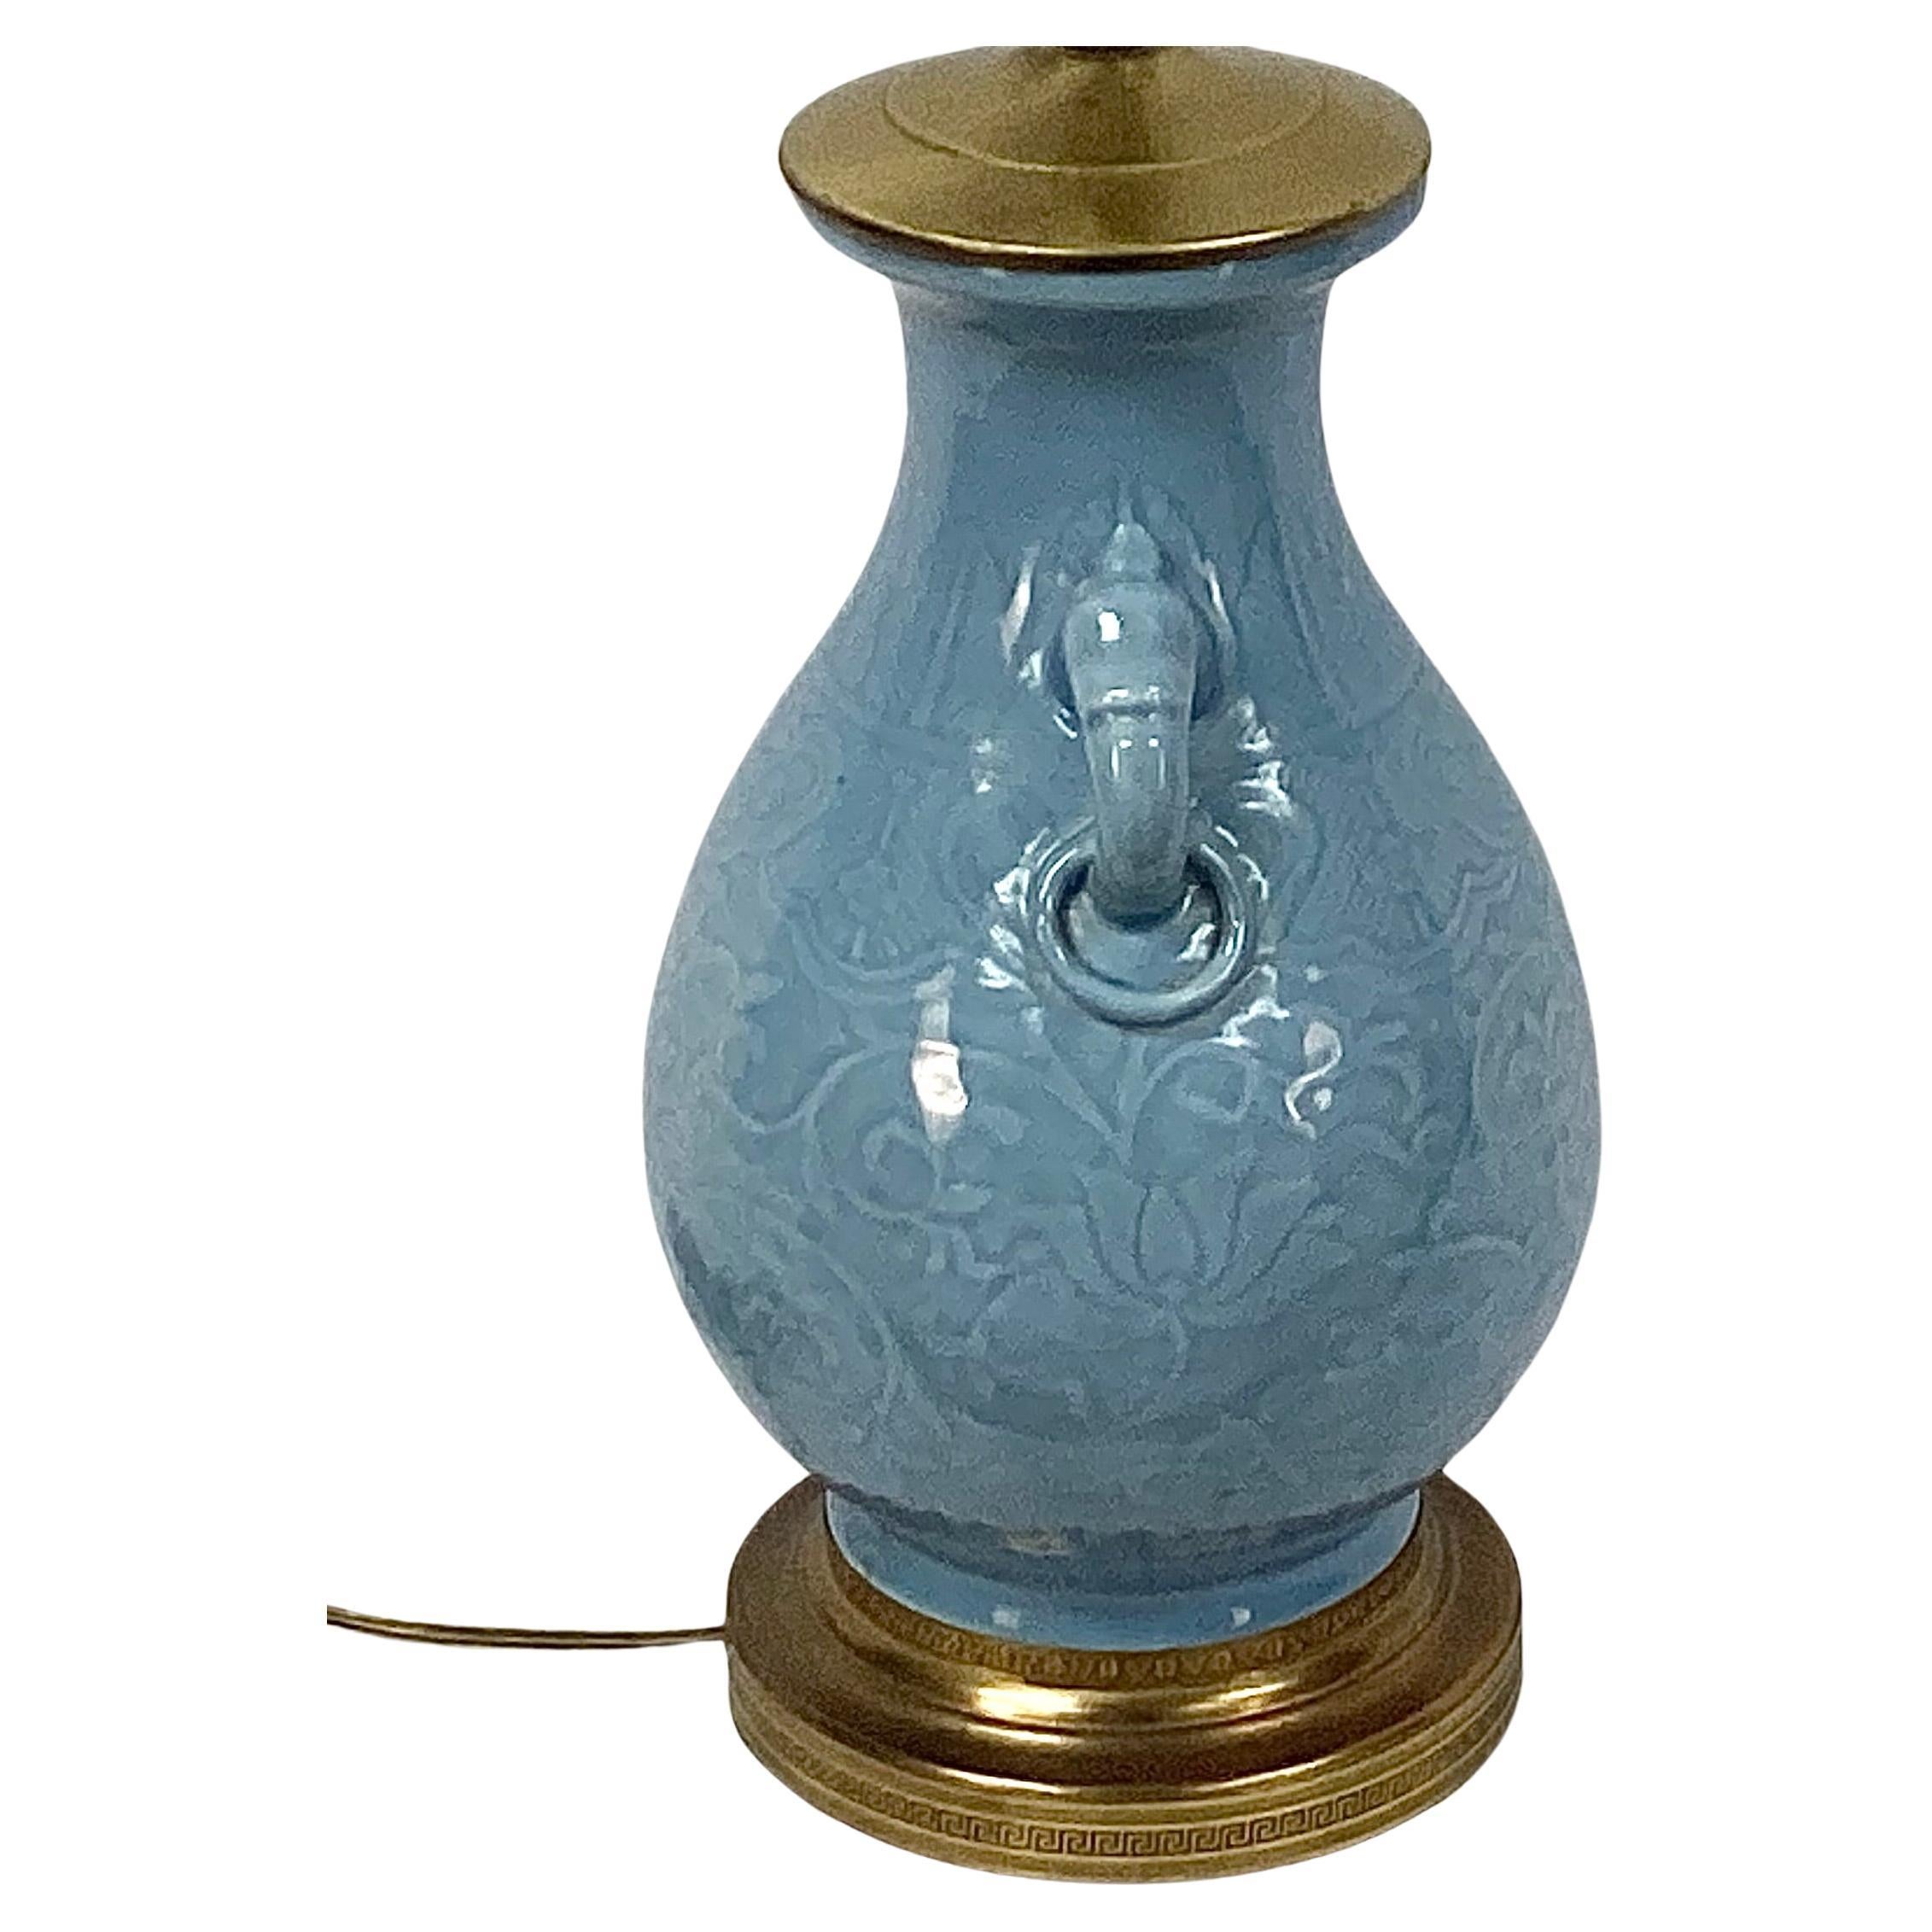  Chinese Gilt Brass Mounted Celadon Porcelain Lamp In Good Condition For Sale In Bradenton, FL